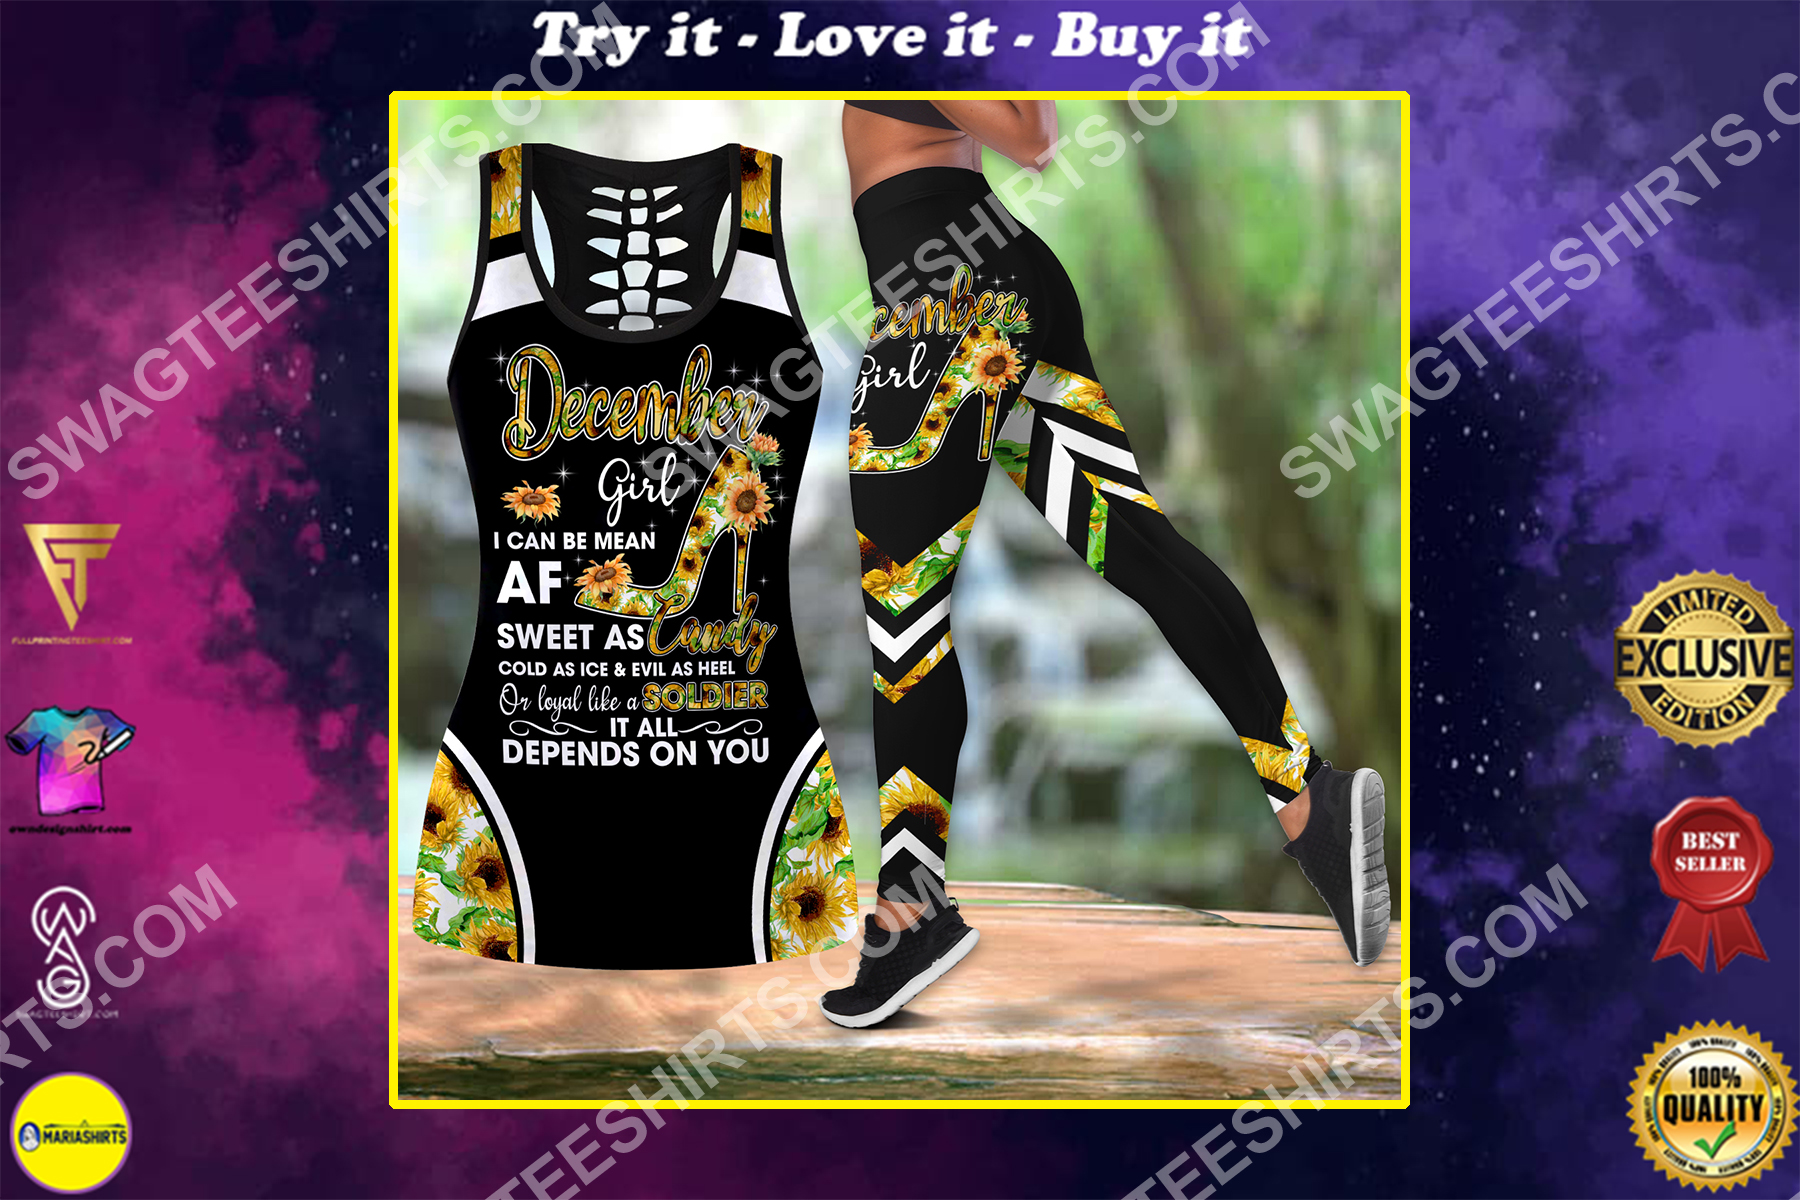 december girl i can be mean it all depends on you birthday gift set sports outfit